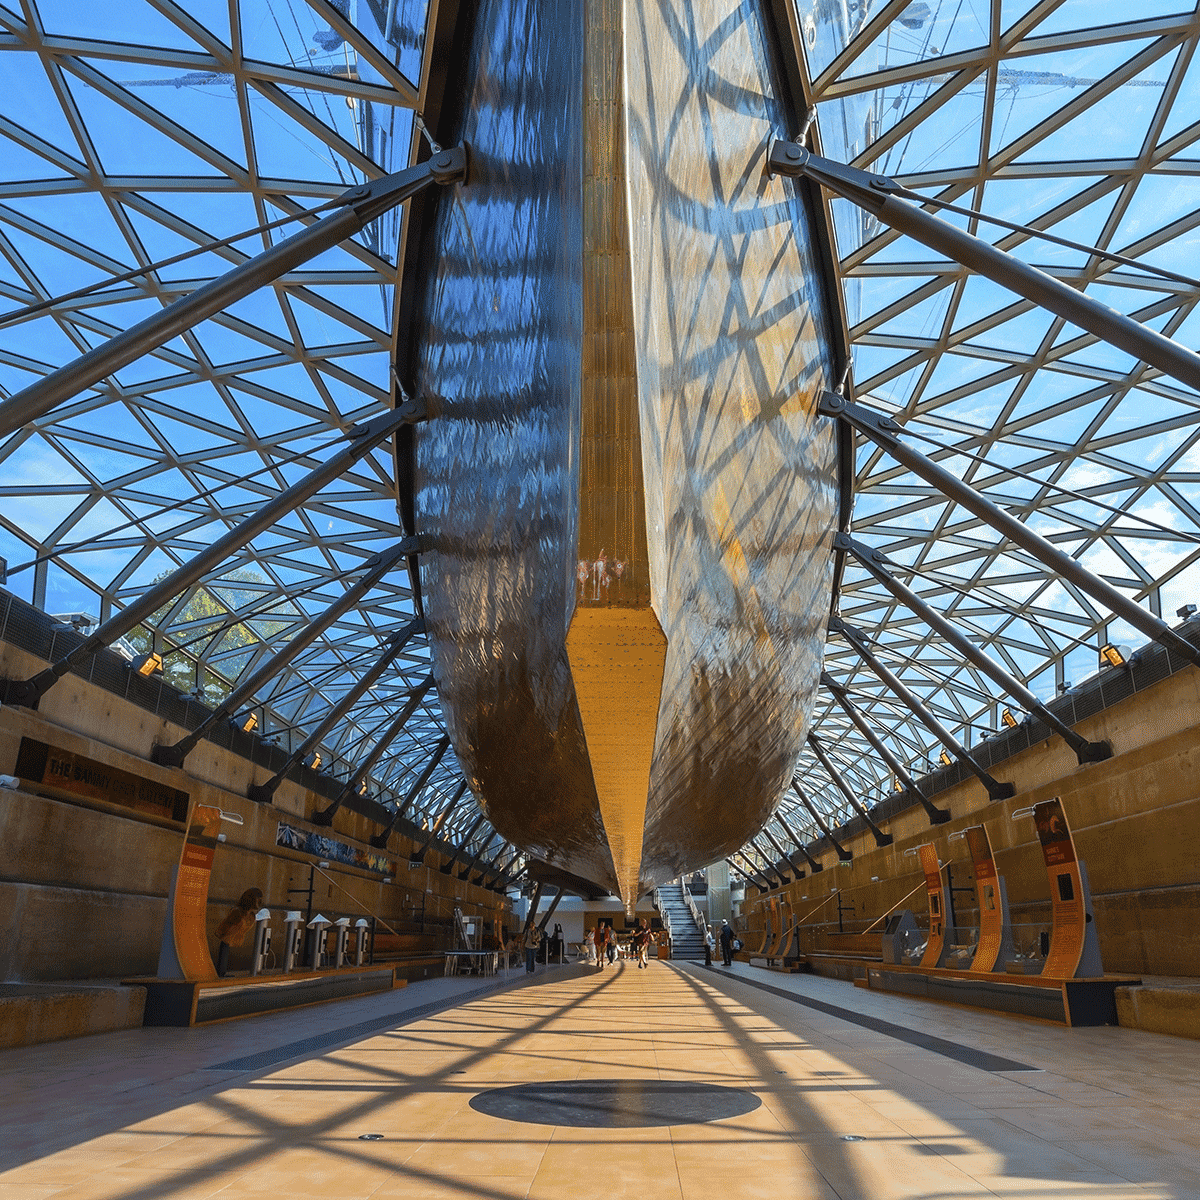 https://www.ntrltd.com/wp-content/uploads/2021/10/NTR-projects-cutty-sark-4.png